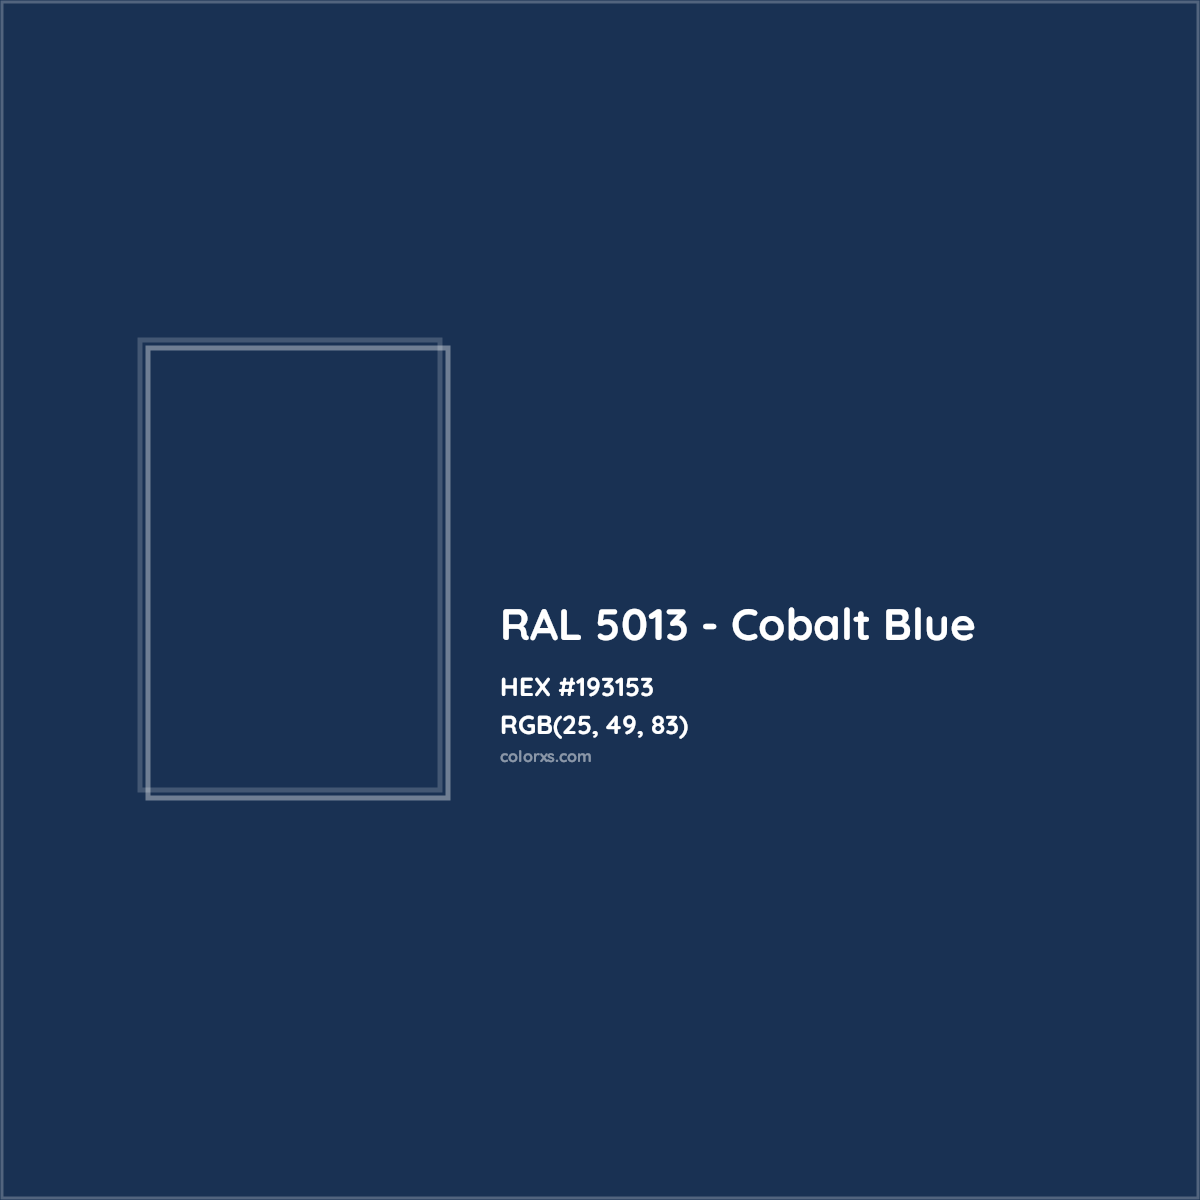 About Ral 5013 Cobalt Blue Color Color Codes Similar Colors And